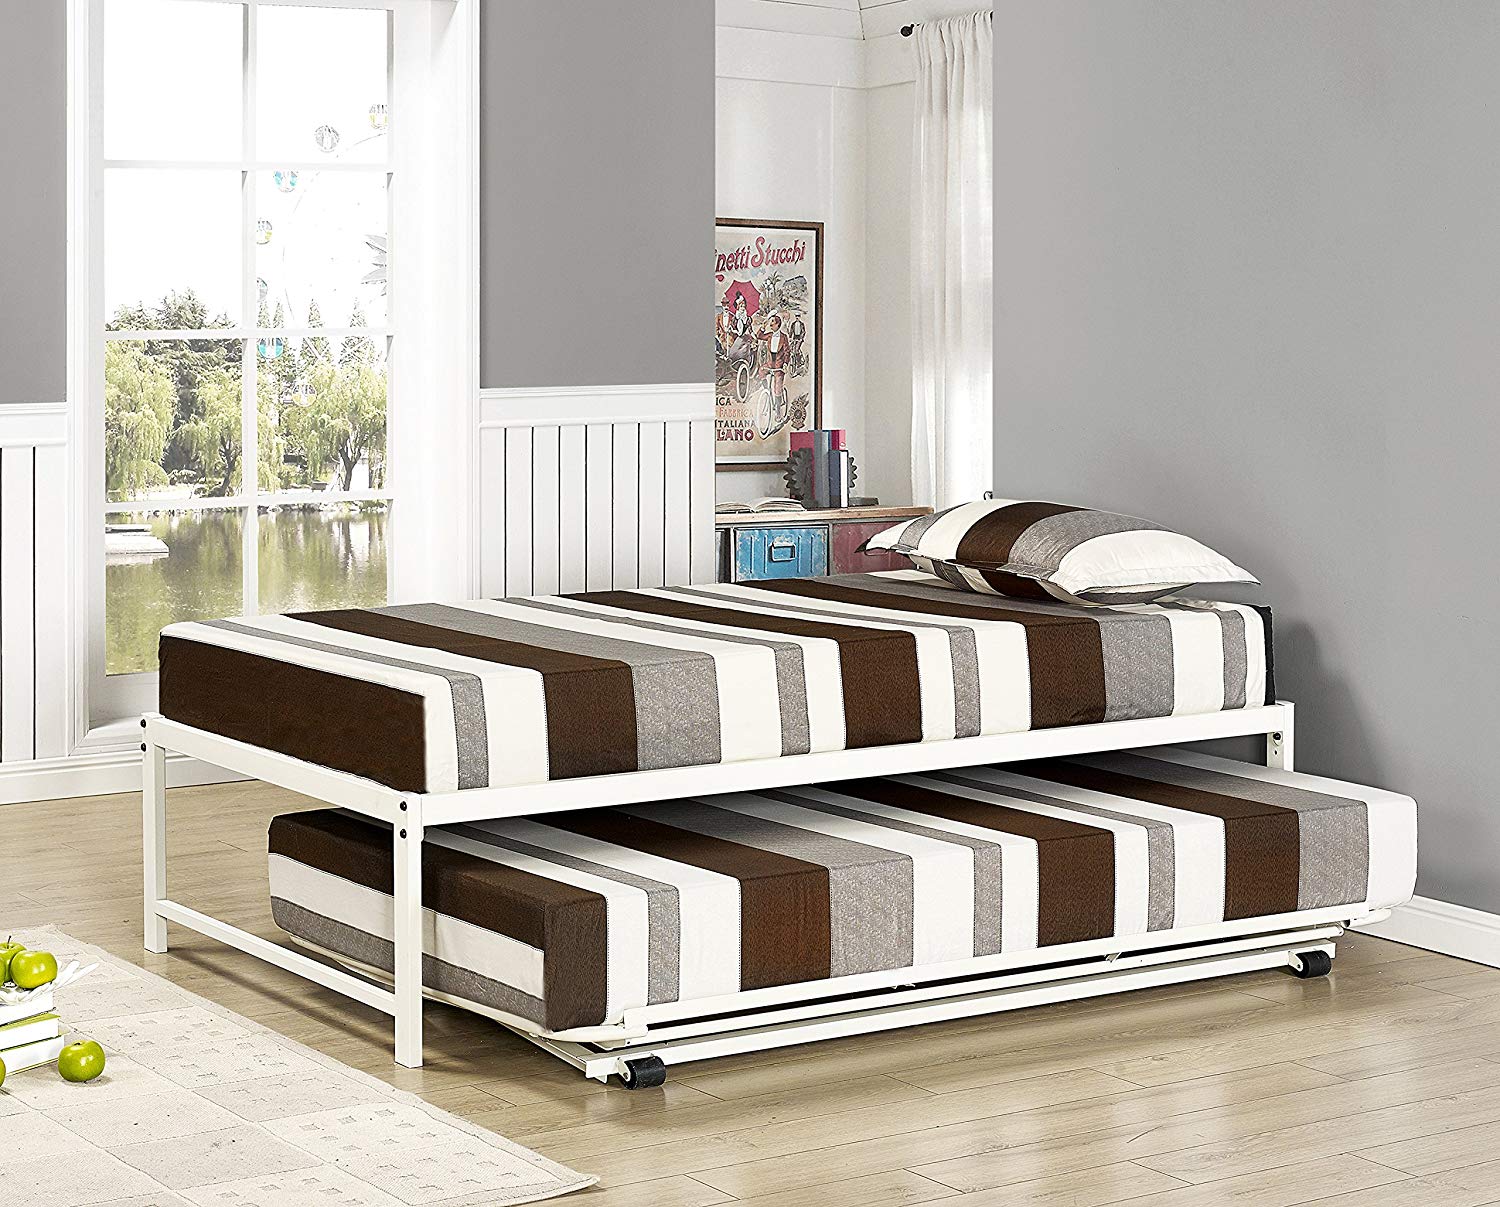 twin trundle bed mattress size